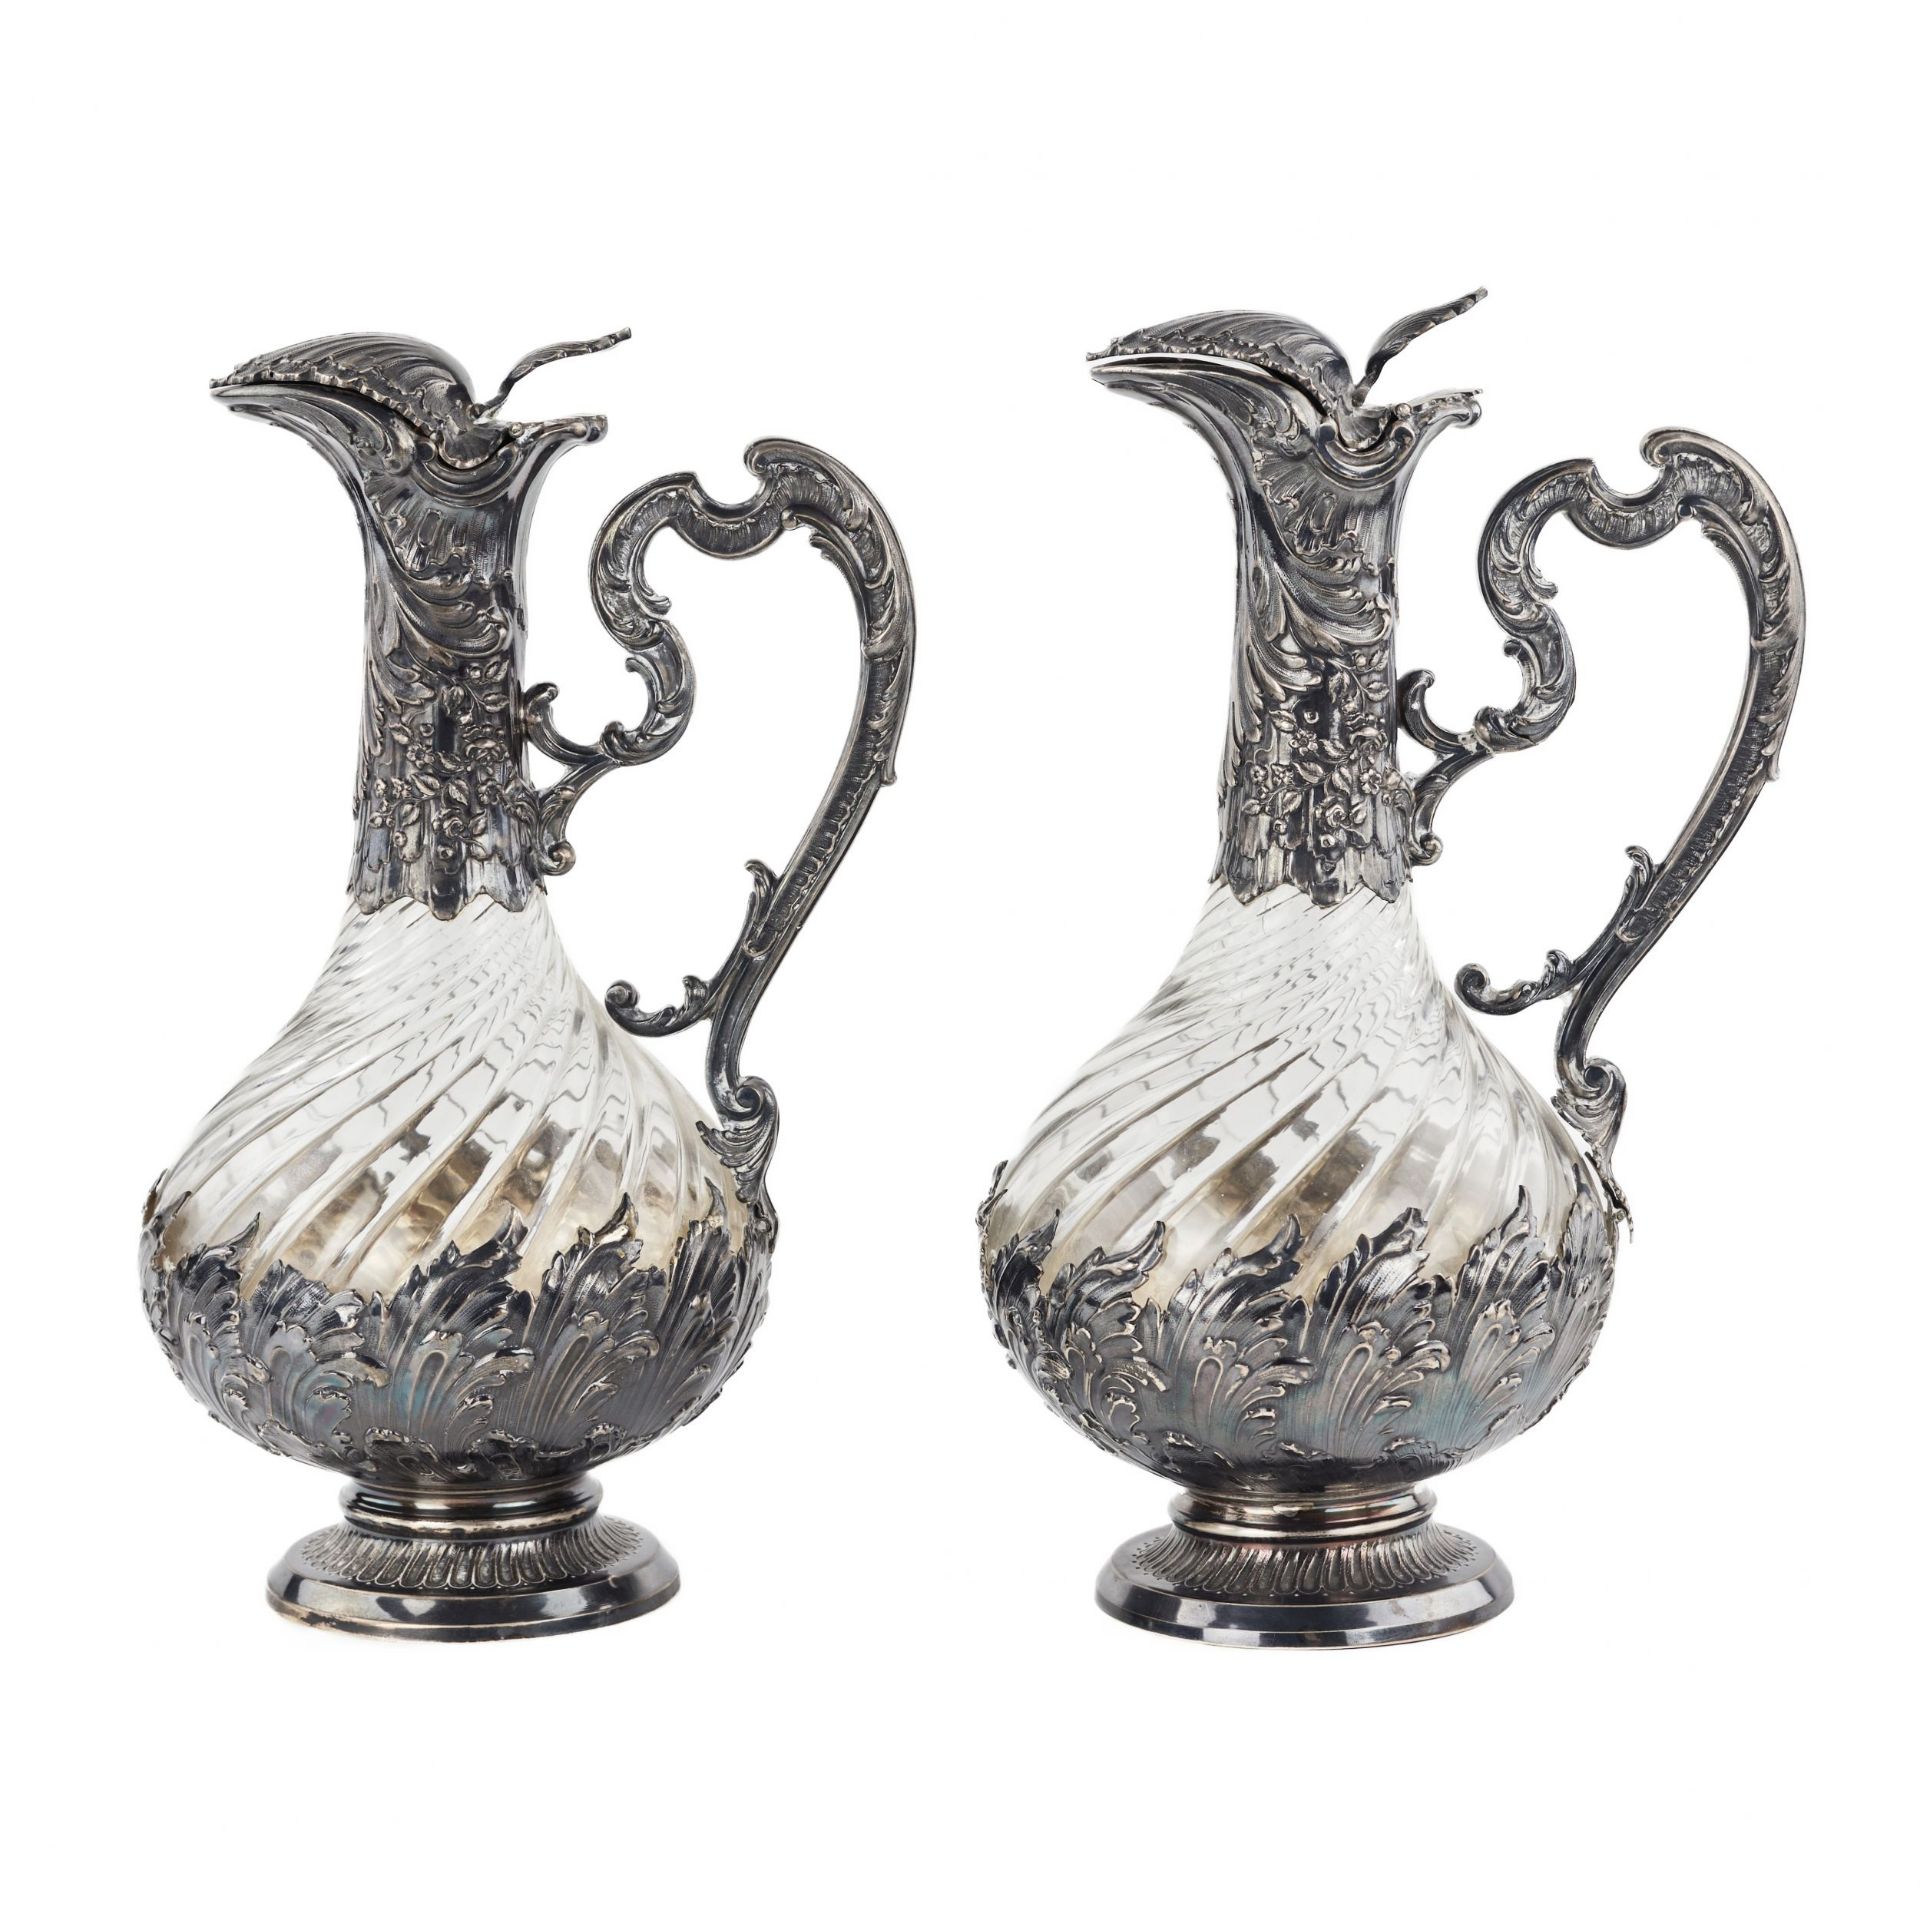 Frangiere & Laroche. Pair of French glass wine jugs in silver from the 1880s. - Bild 2 aus 9